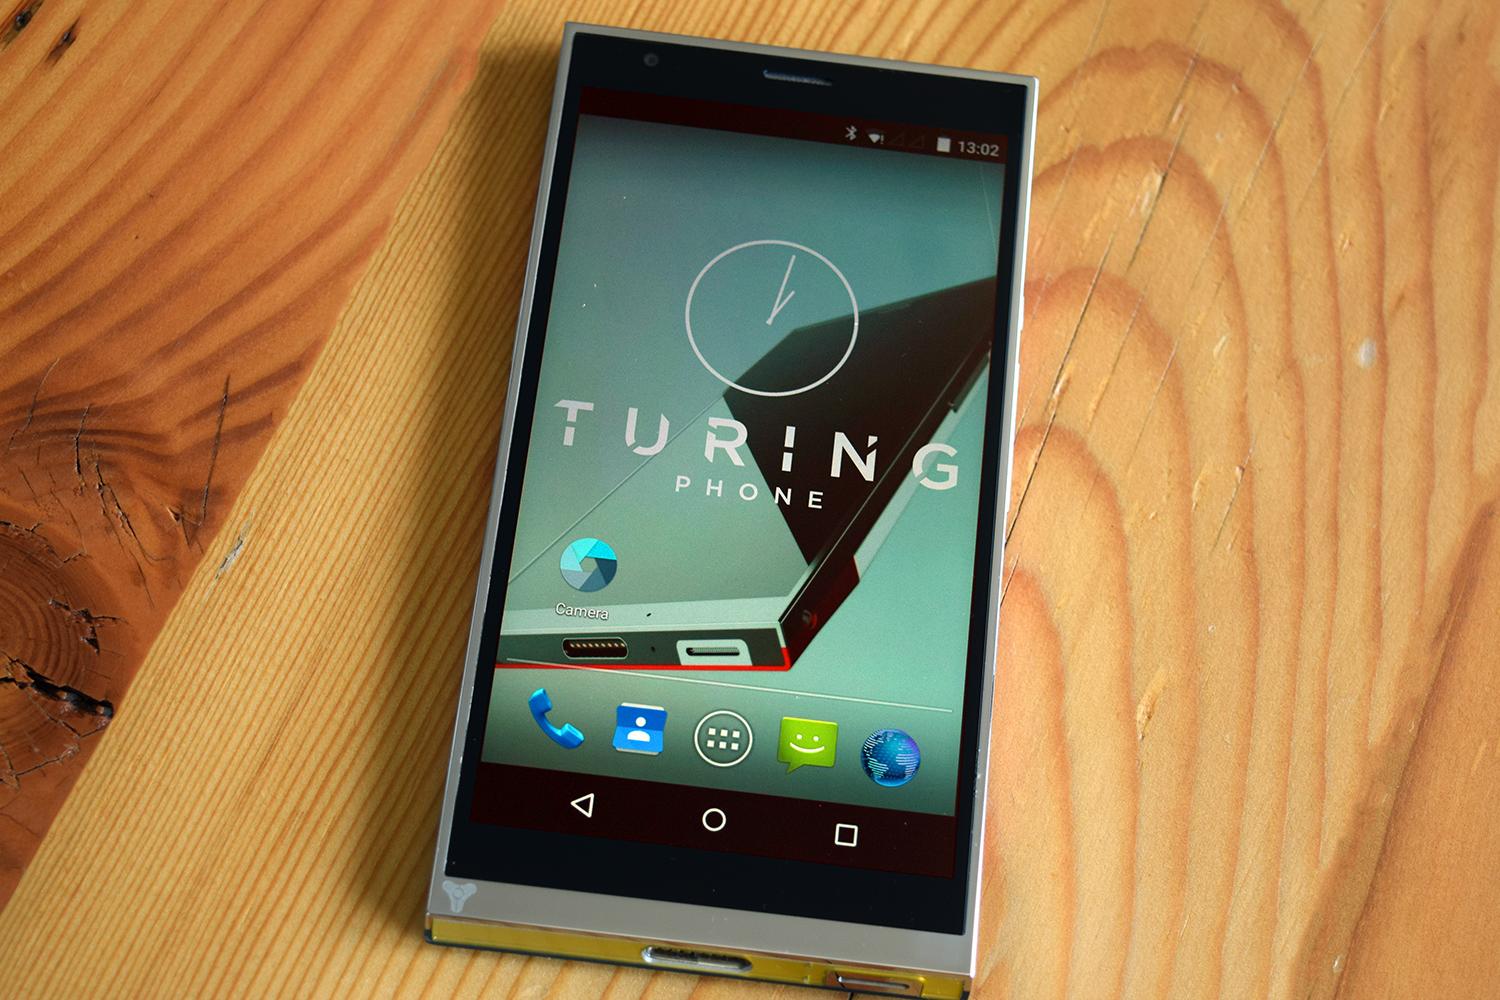 turing phone interview 0166